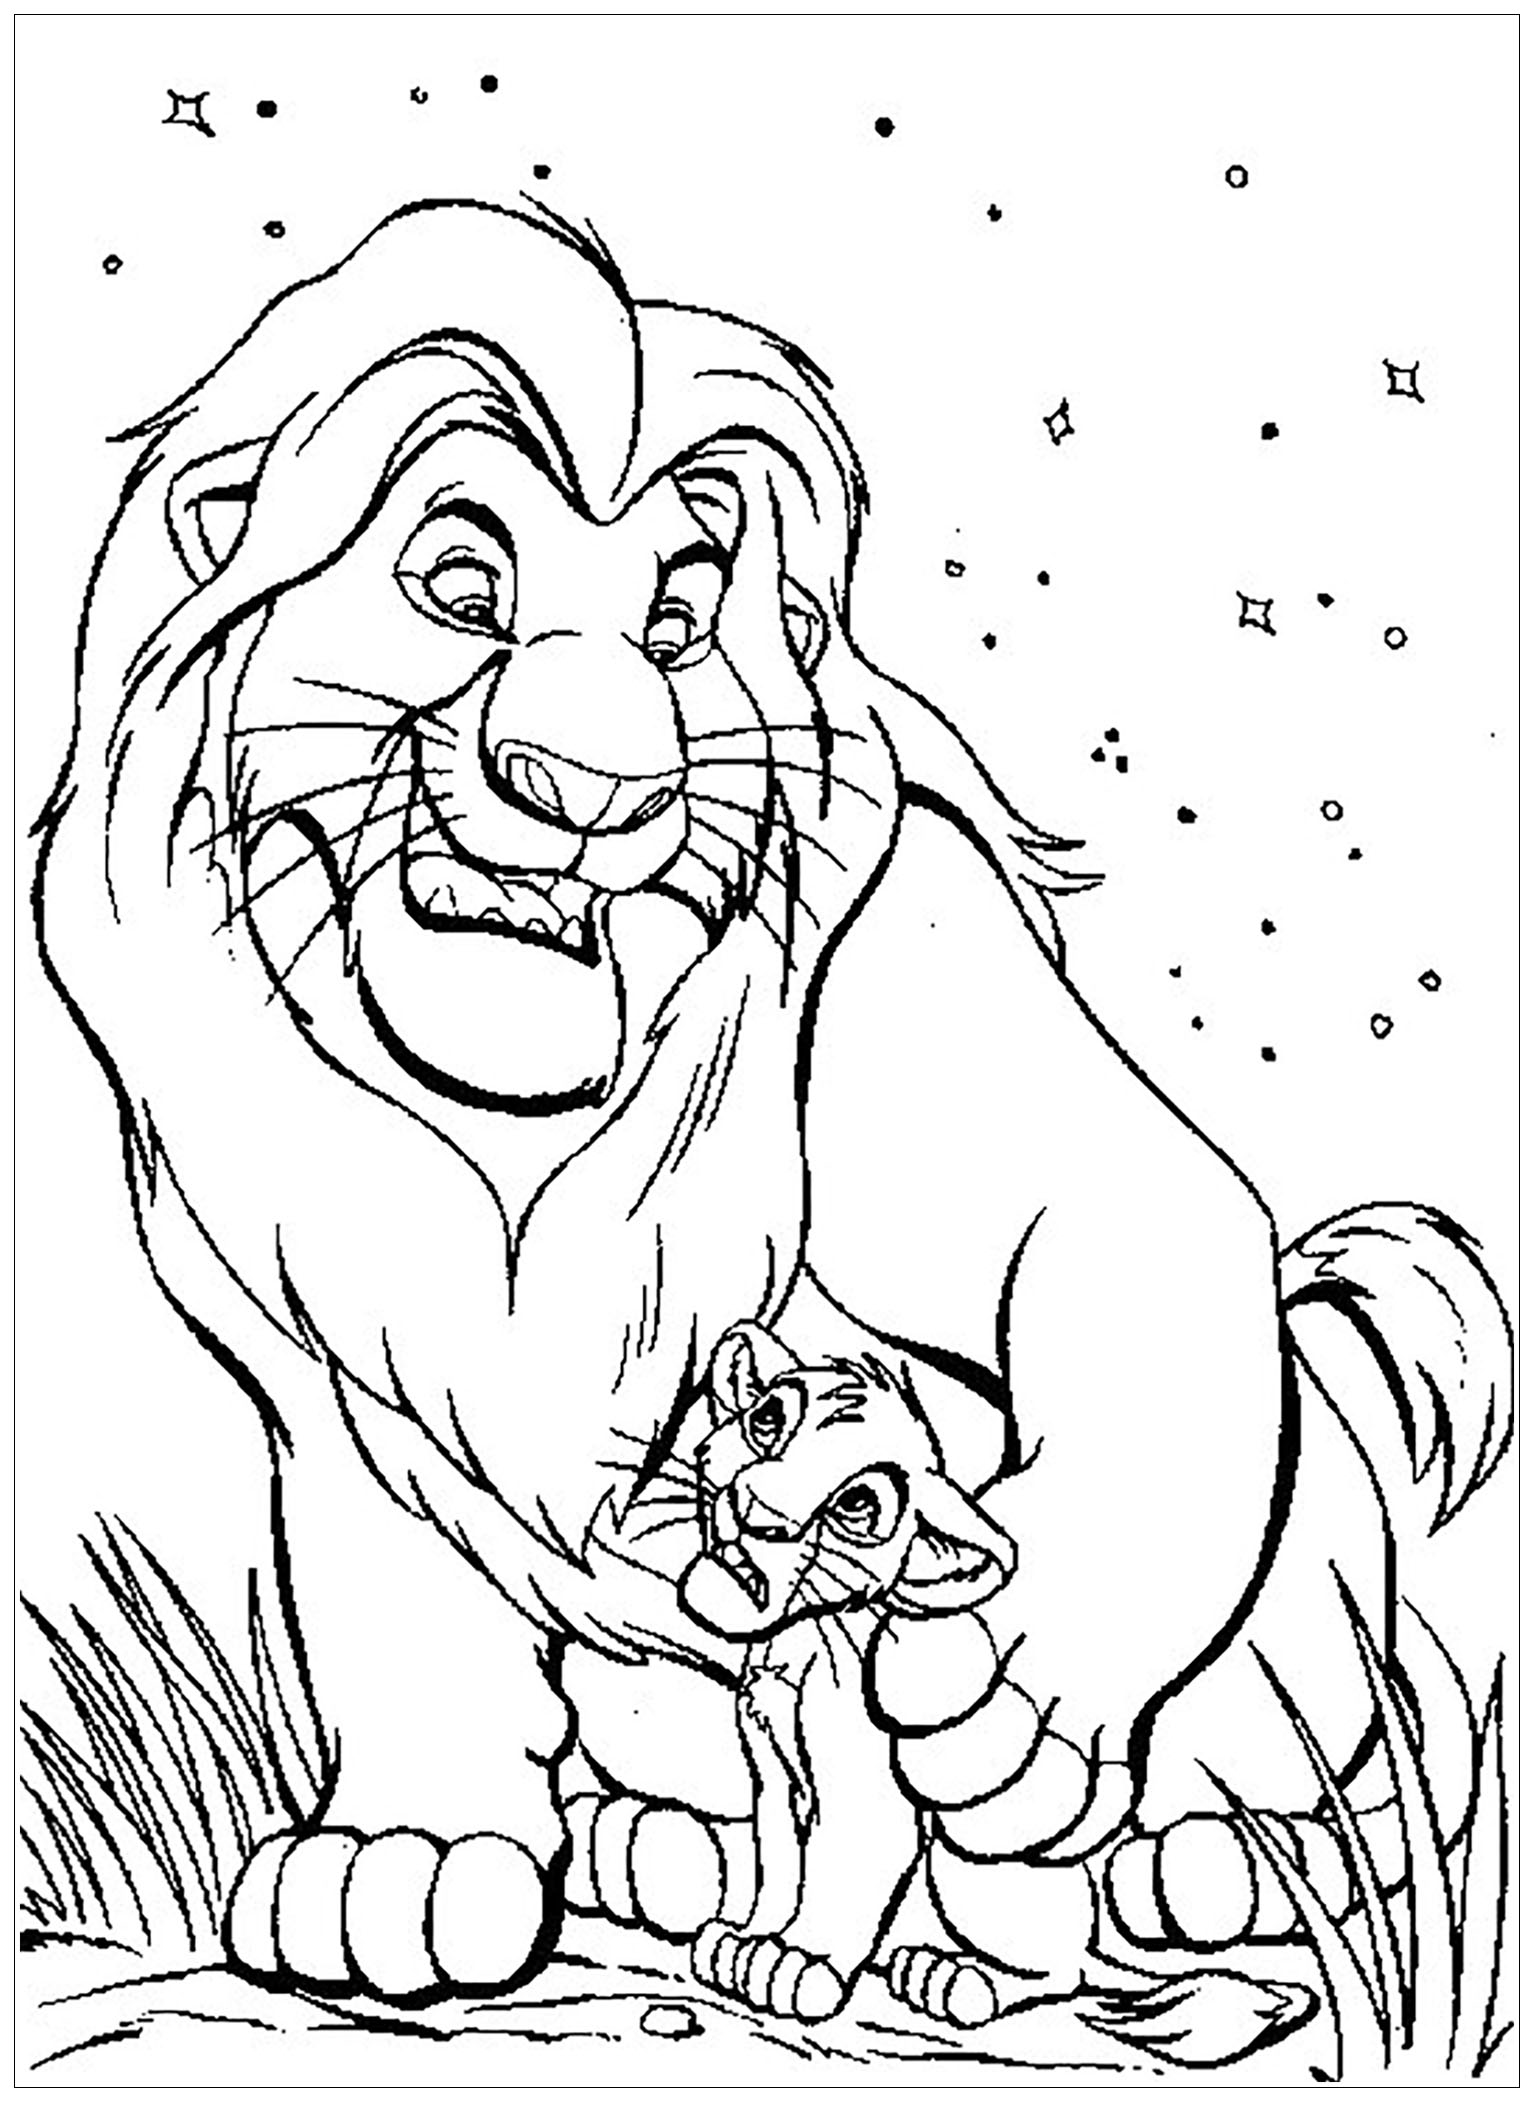 Mufasa With Simba The Lion Kids Coloring For Children 3rd Grade Problem  Solving Lion King Coloring Pages Coloring Pages primary 7 math worksheets  fifth standard math calculus practice exam use inscribed angles